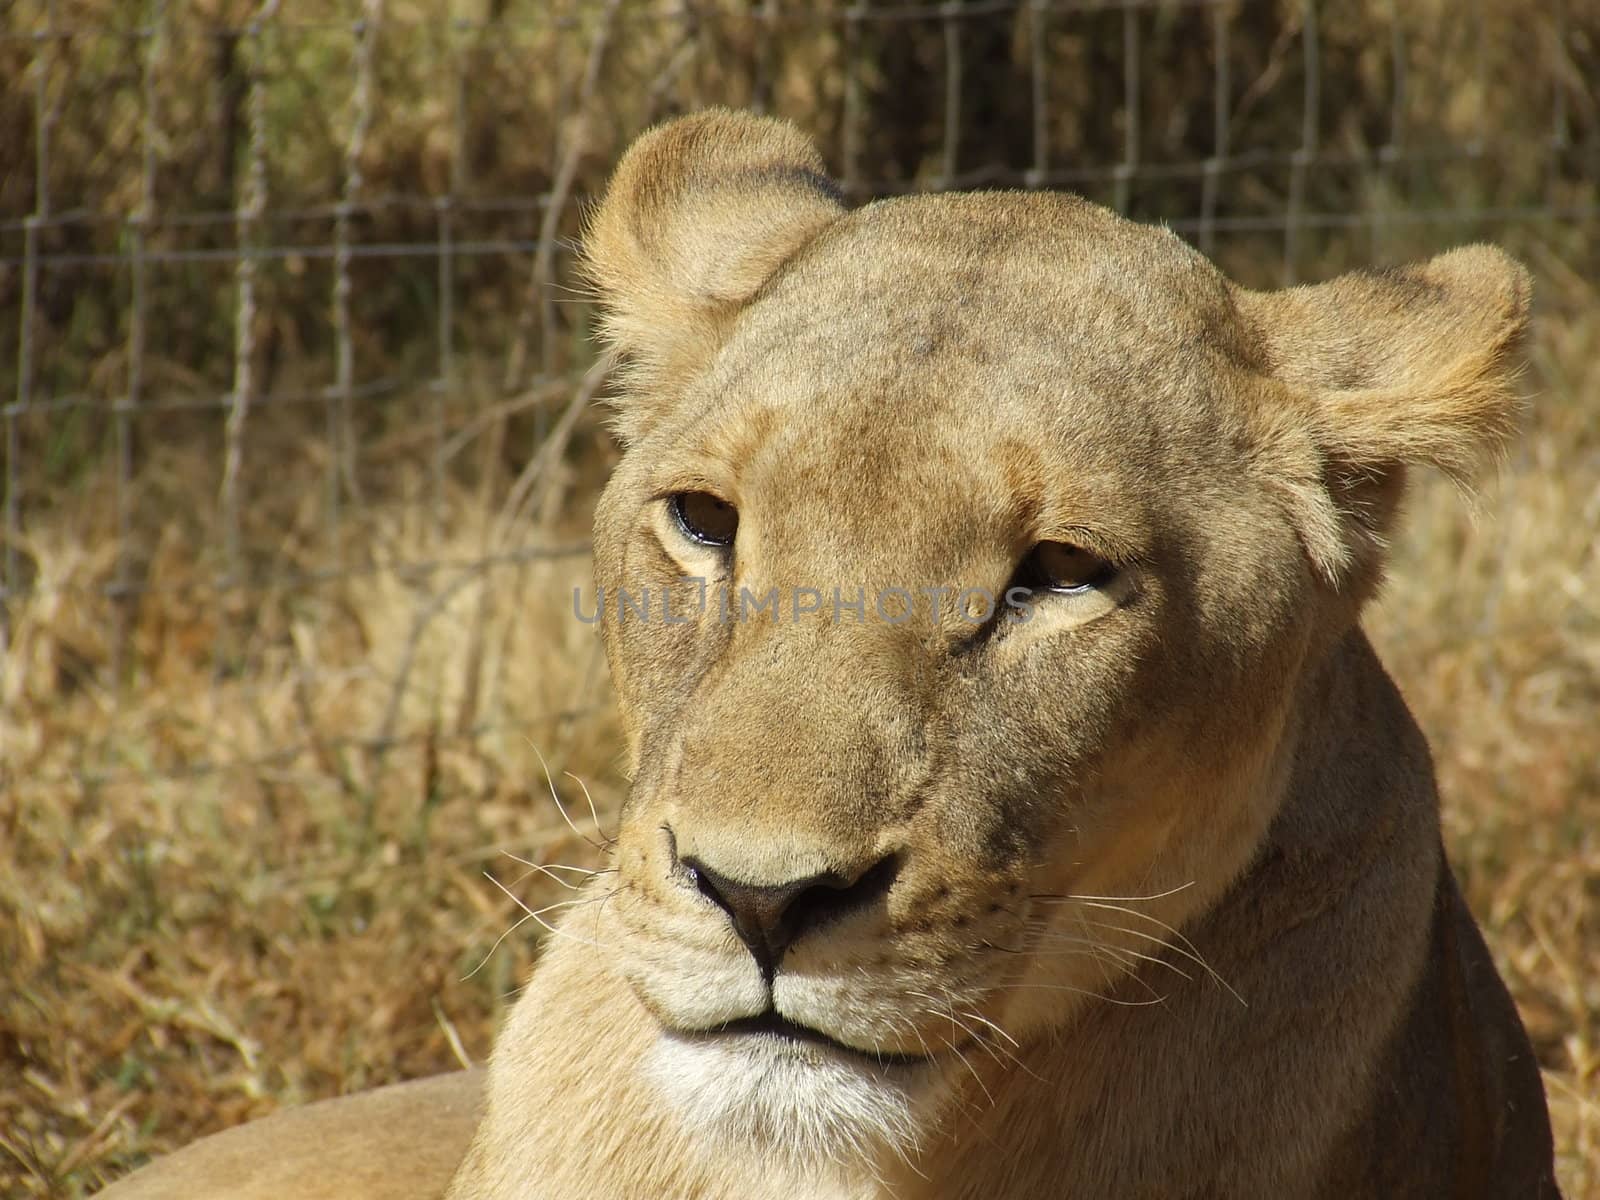 Pensive Lioness in a game reserve in South Africa